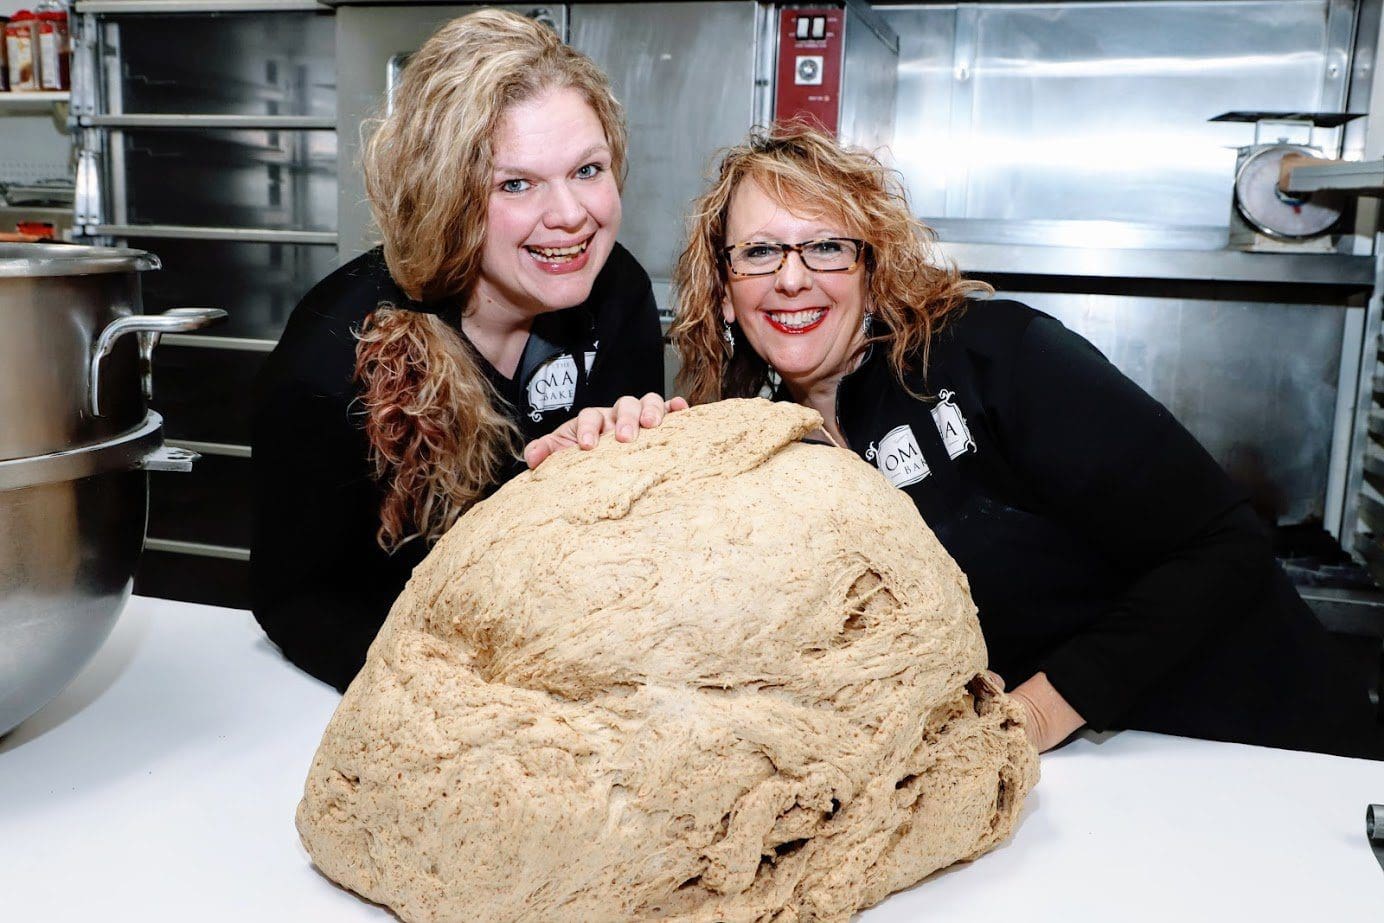 Laura Risola and Michelle Kaiser at The Omaha Bakery